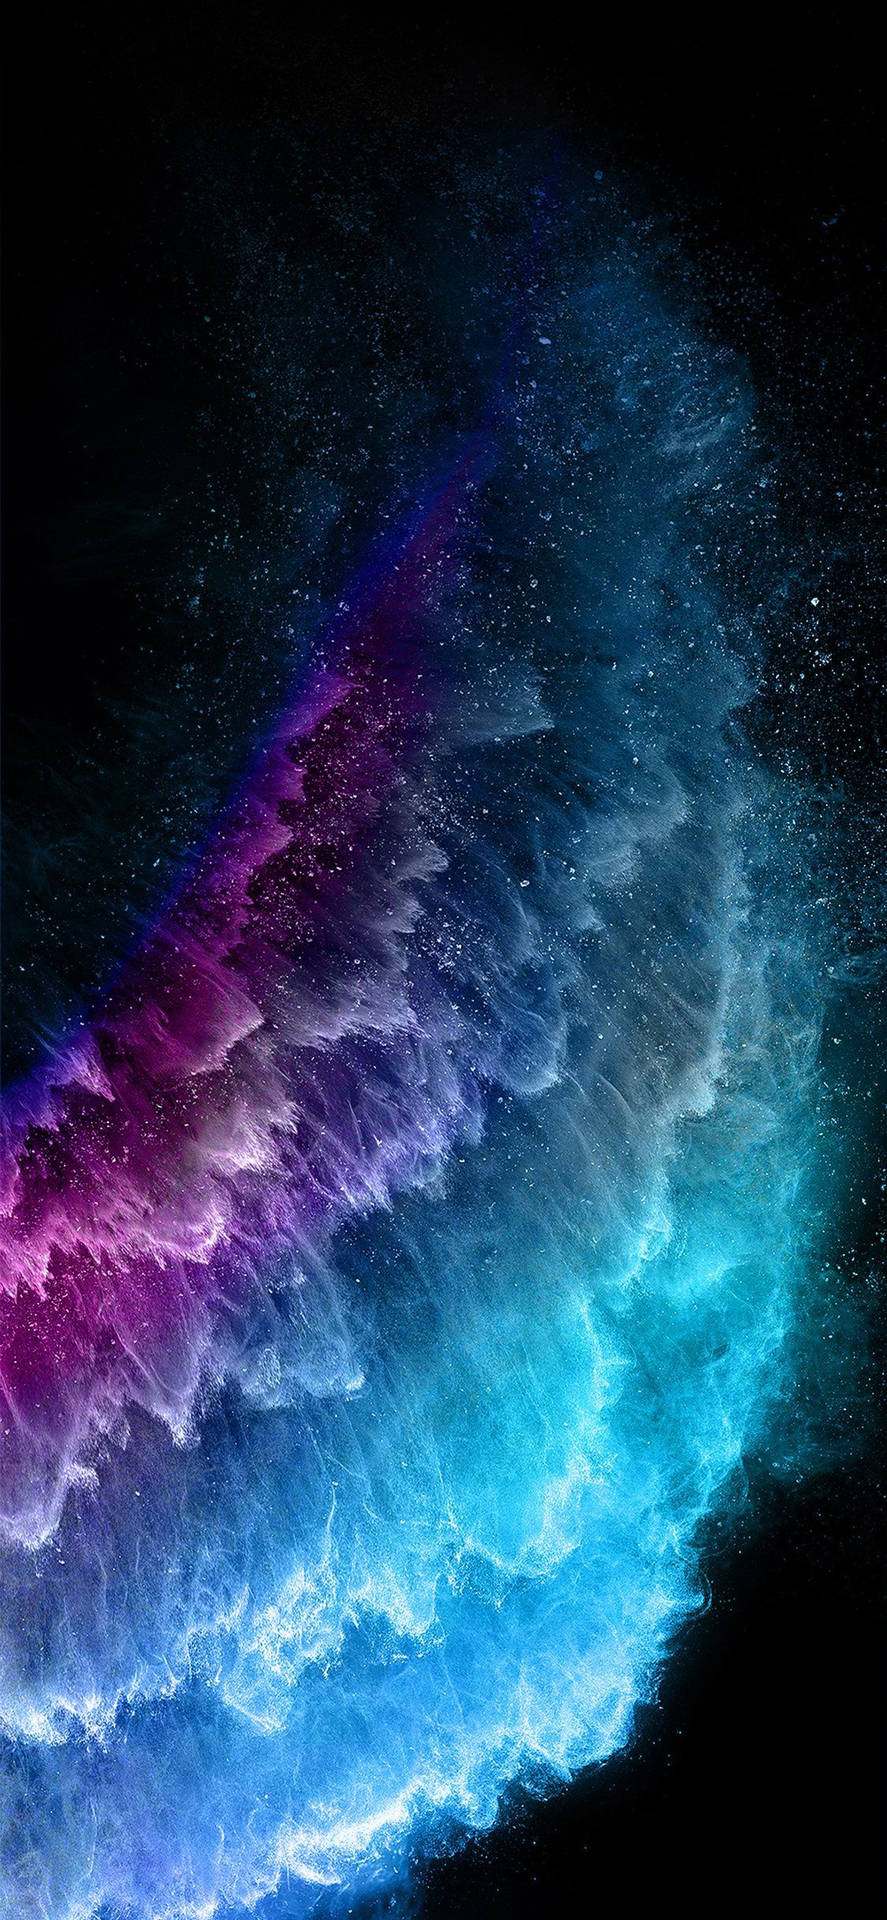 The new iPhone 11 featuring Neon Crystals Wallpaper